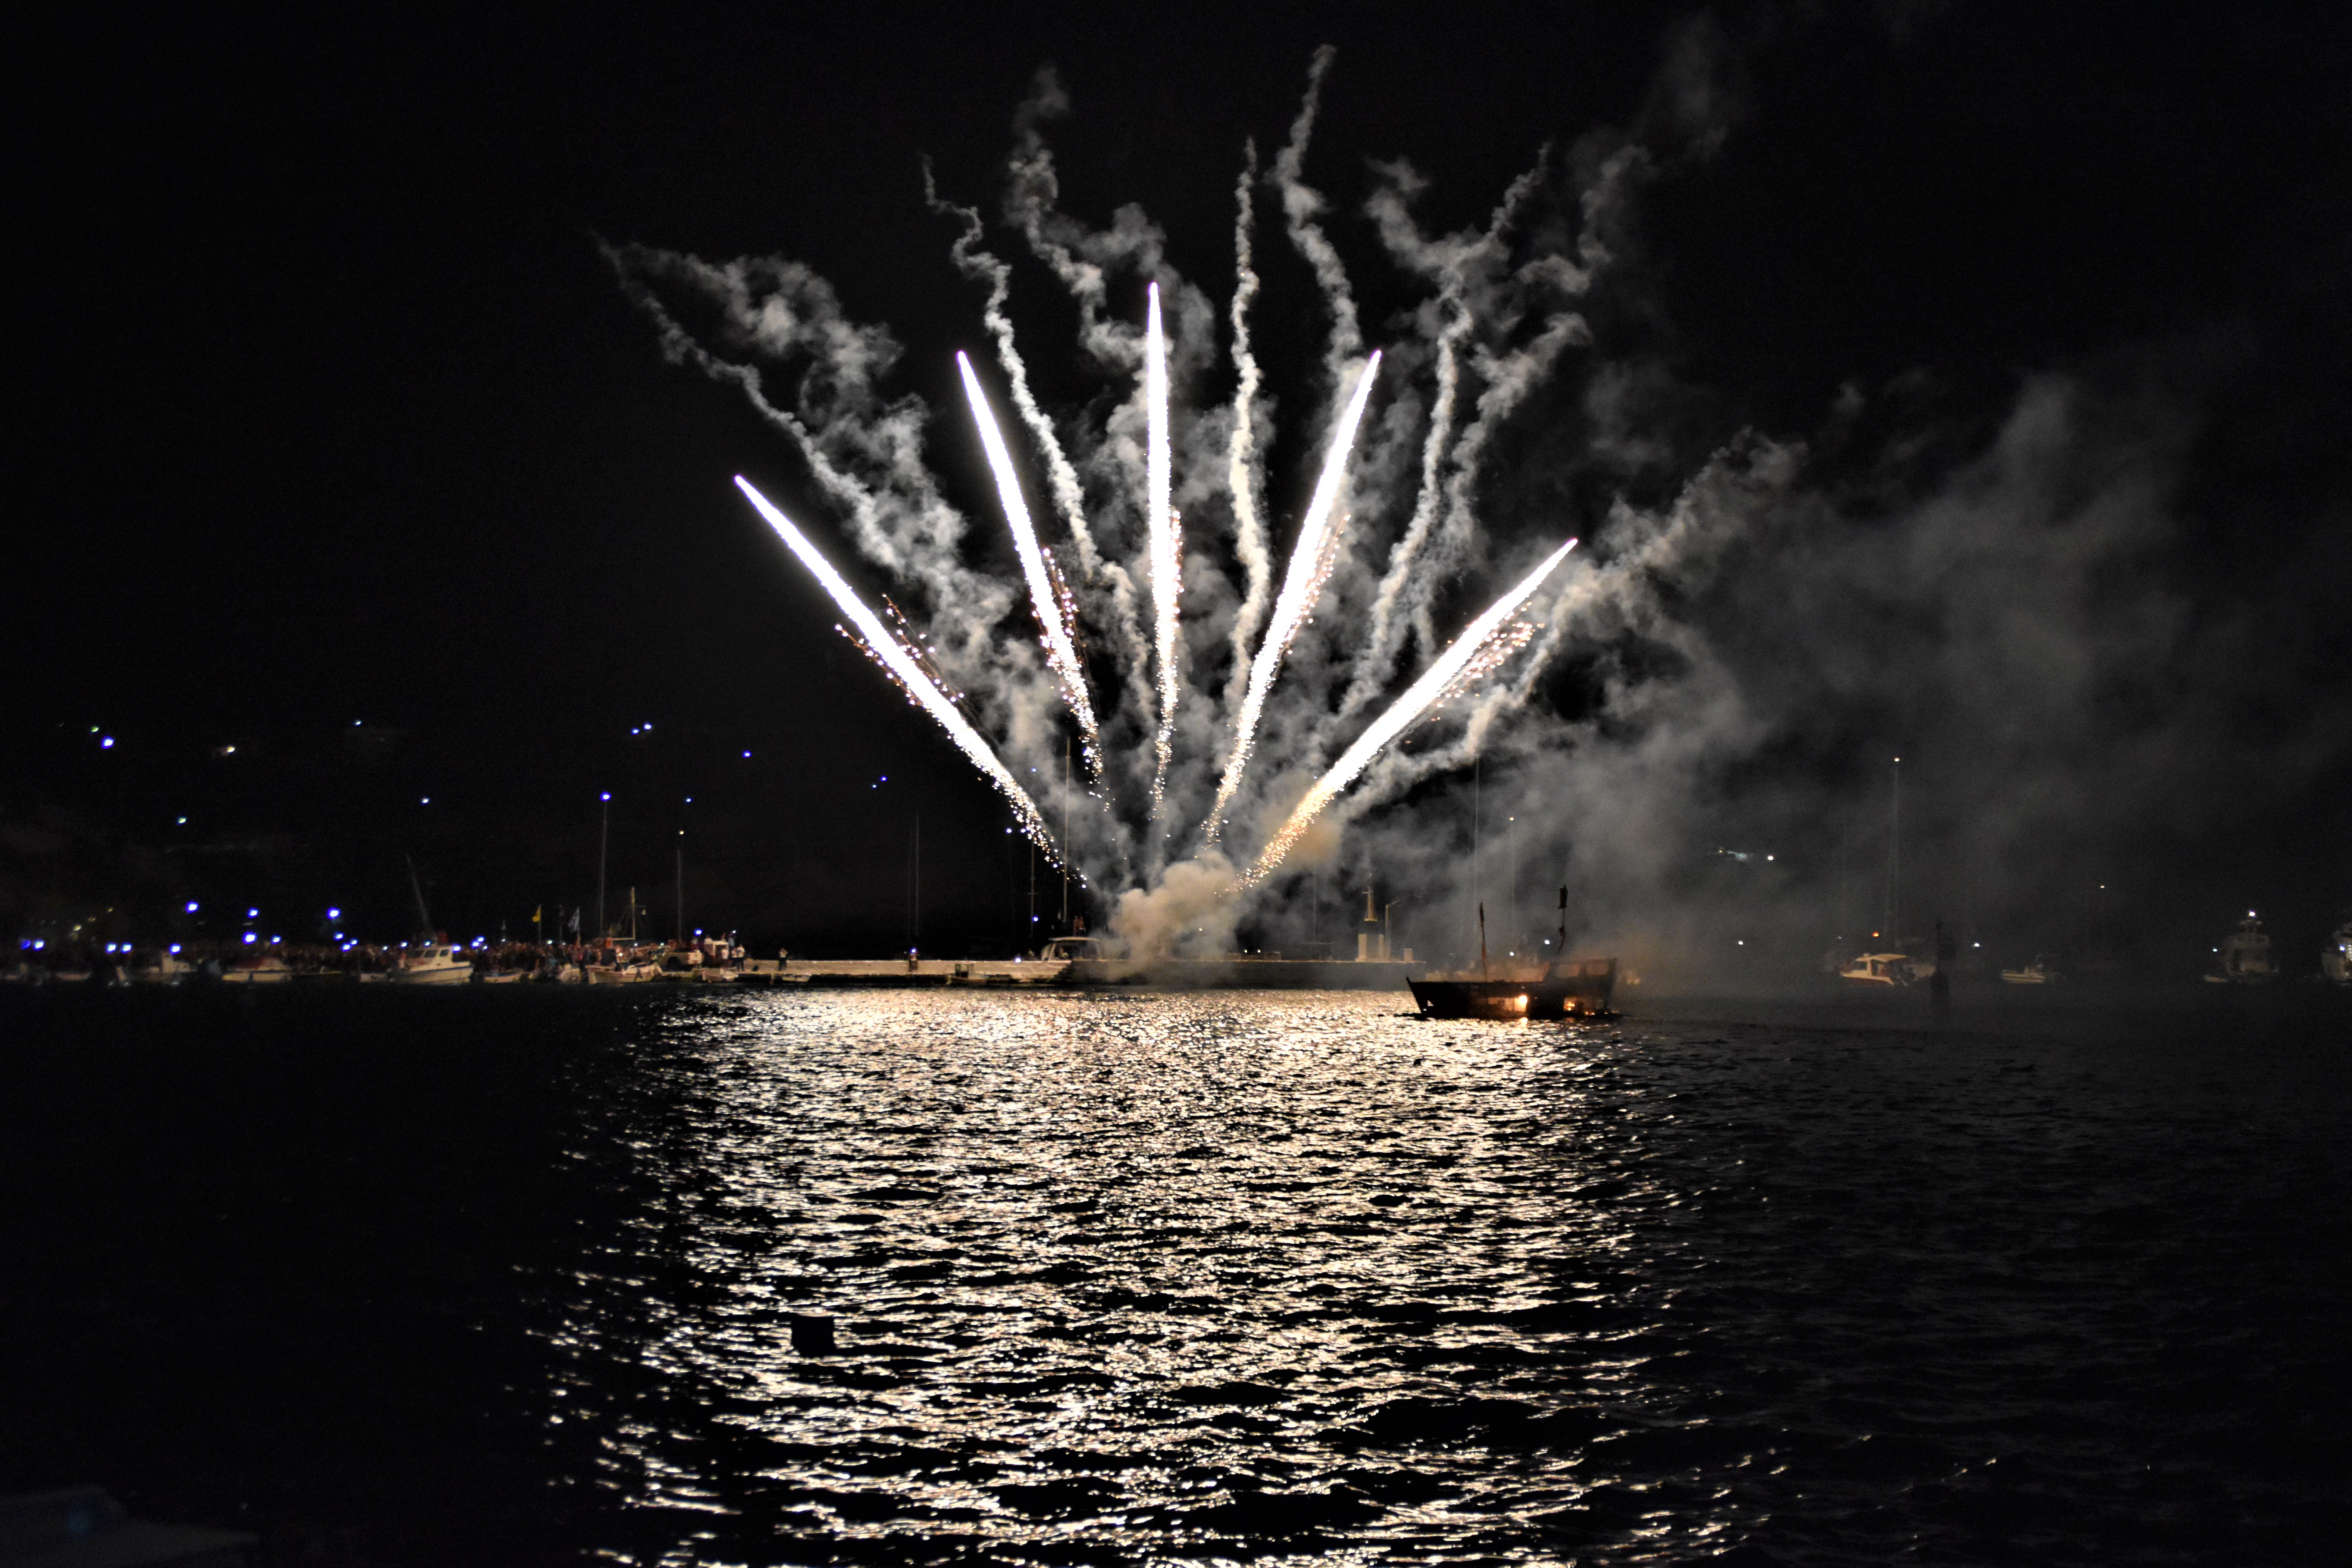 White fireworks emerging from a dark sea illuminate a small burnt boat with glowing embers.